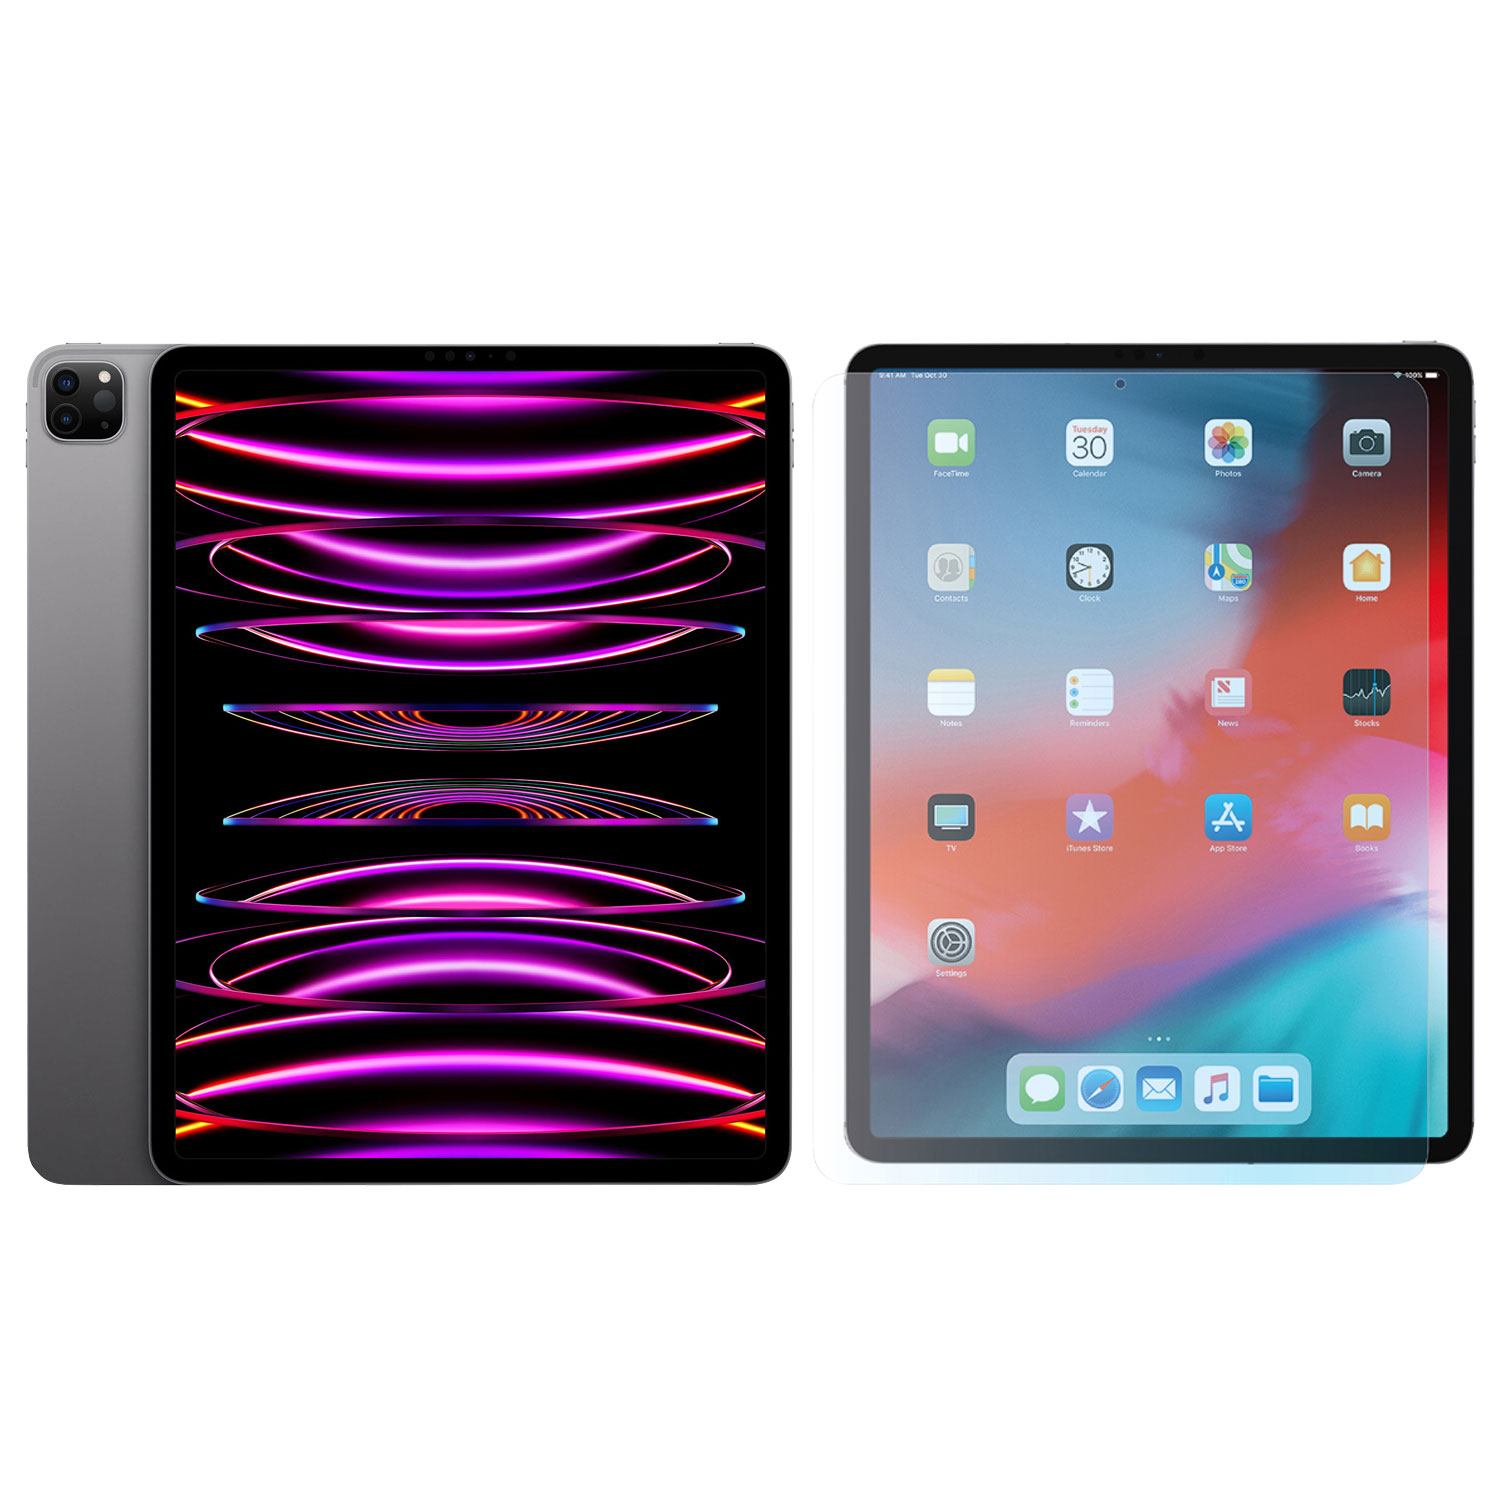 Apple iPad Pro 12.9" 256GB Wi-Fi (6th Generation) with Milano Glass Screen Protector - Space Grey